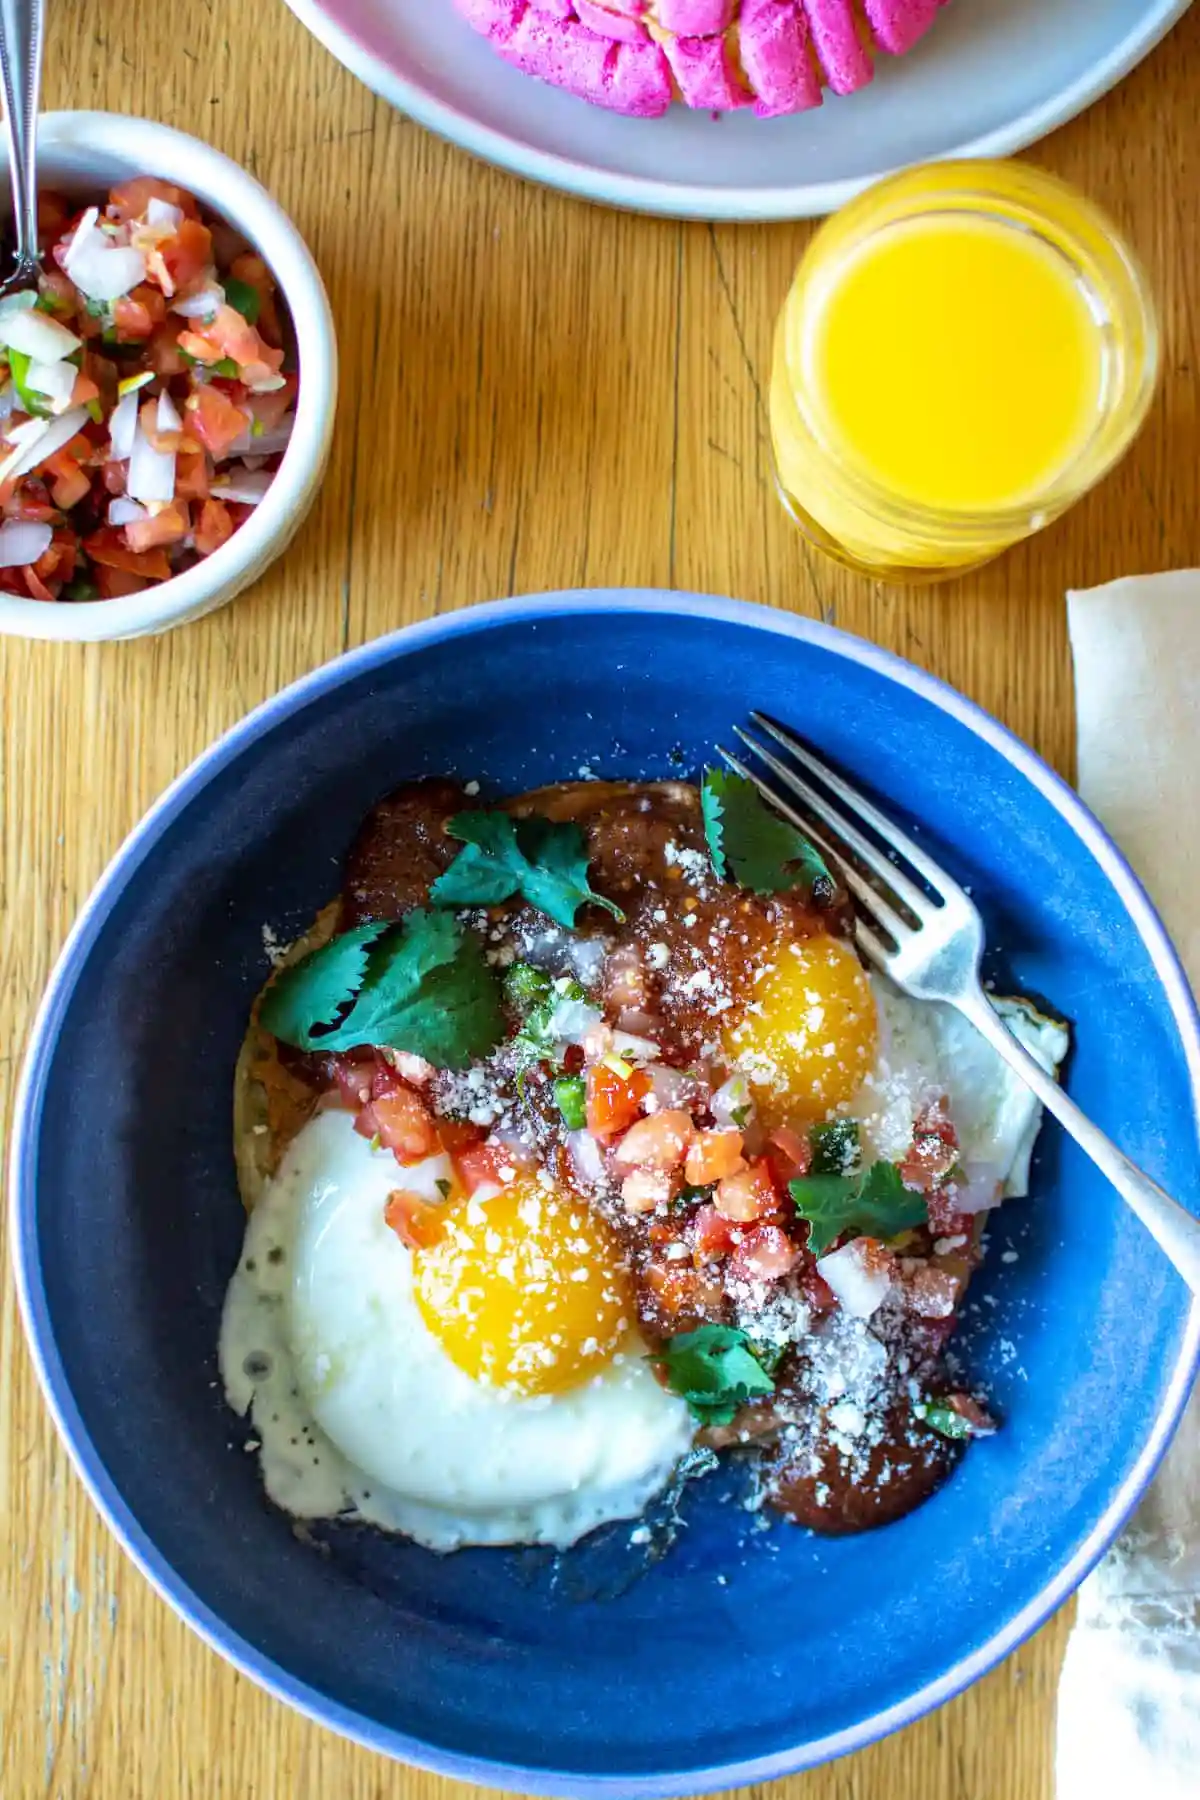 A blue plate of huevos rancheros topped with pico de Gallo sitting next to a glass of orange juice and a concha.